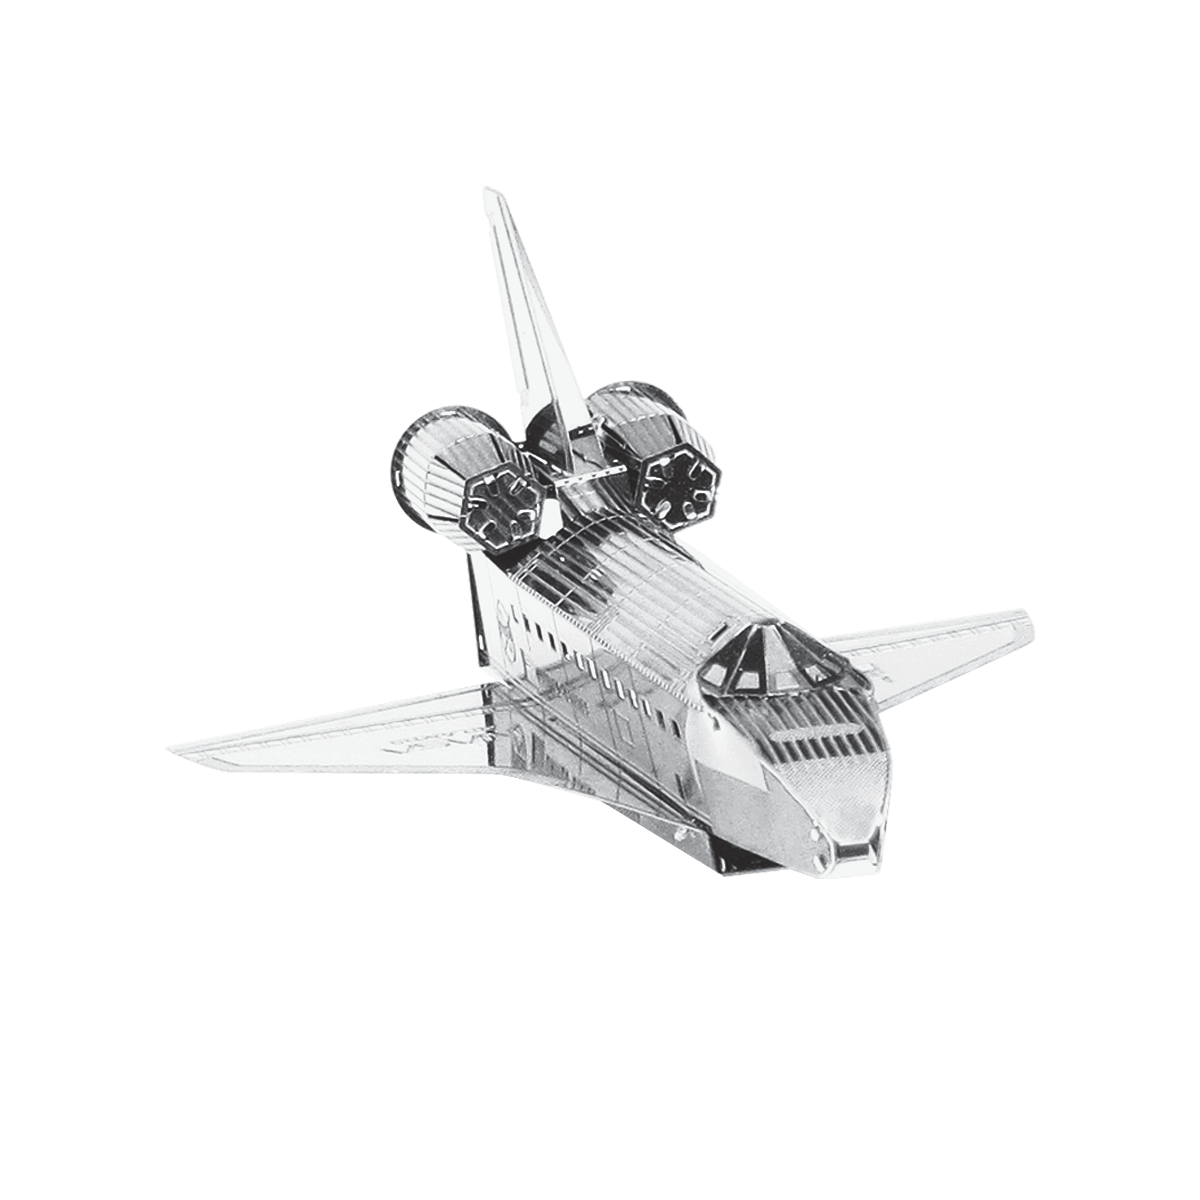 SET of 2 Fascinations Metal Earth Space Shuttle ATLANTIS & DISCOVERY Model Kits 